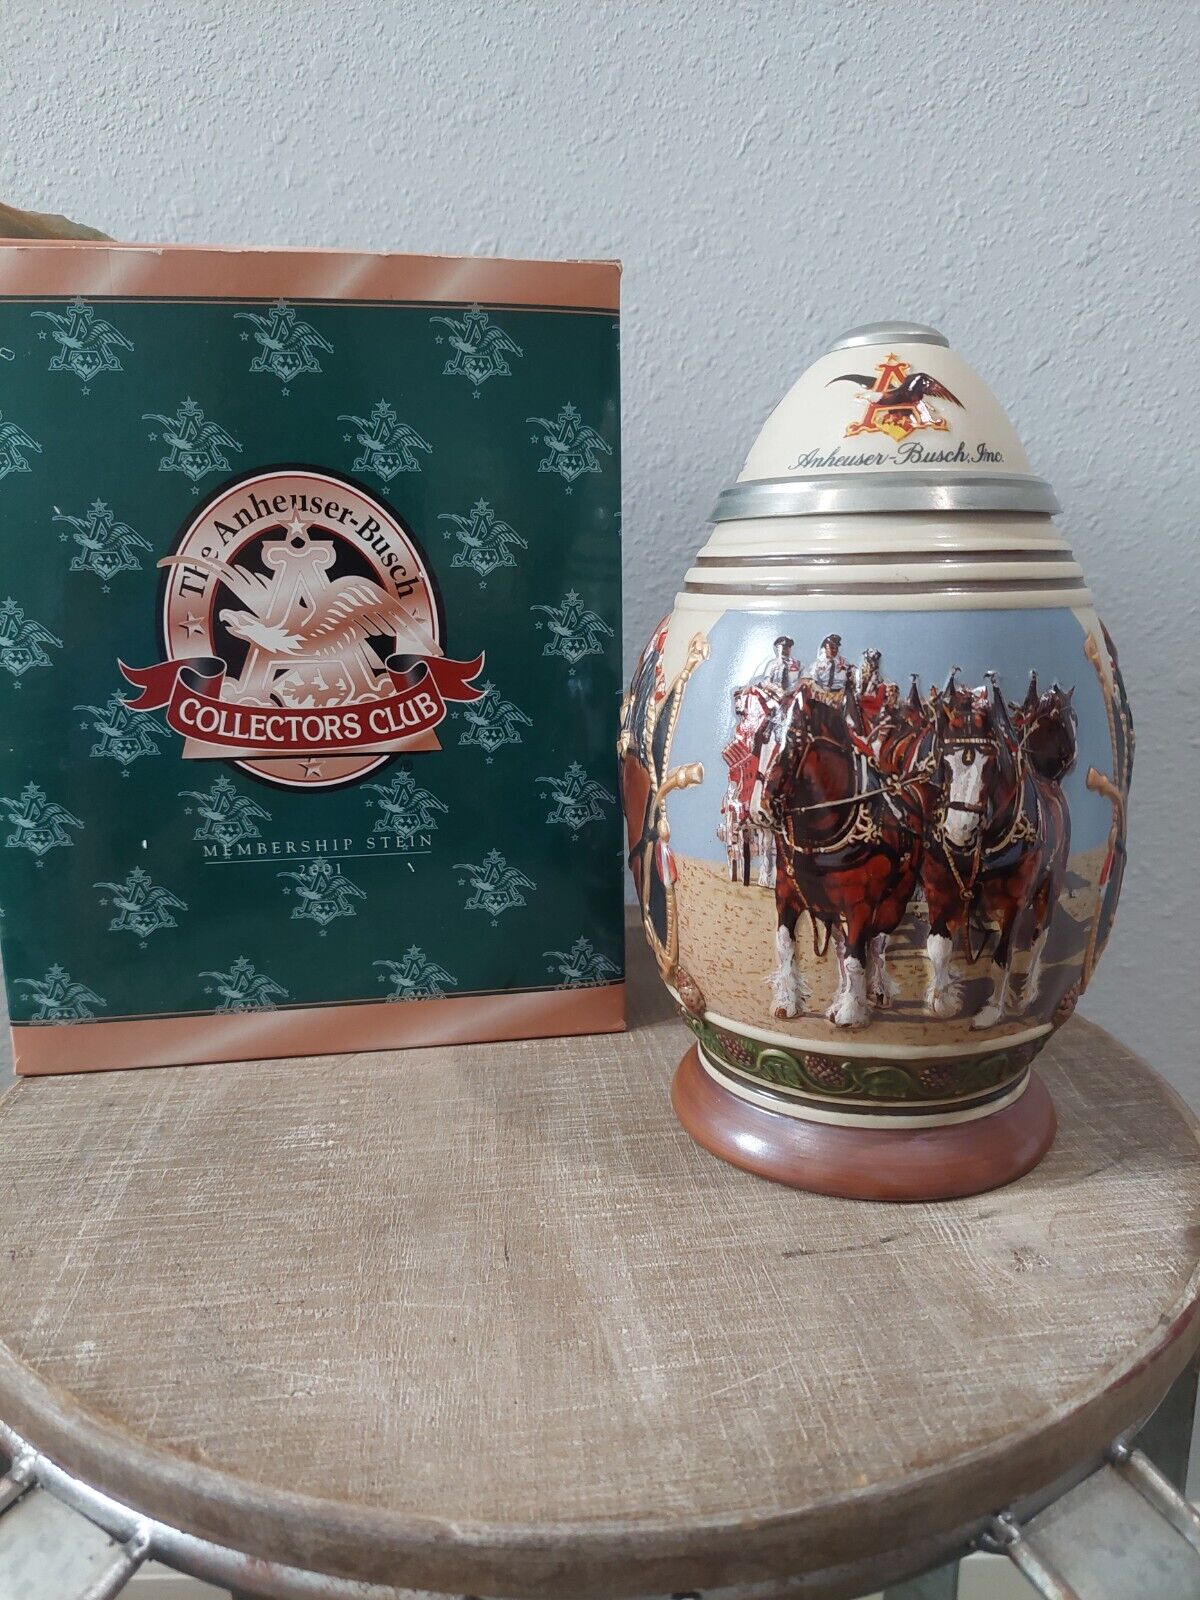 2001 Budweiser Members Only Stein